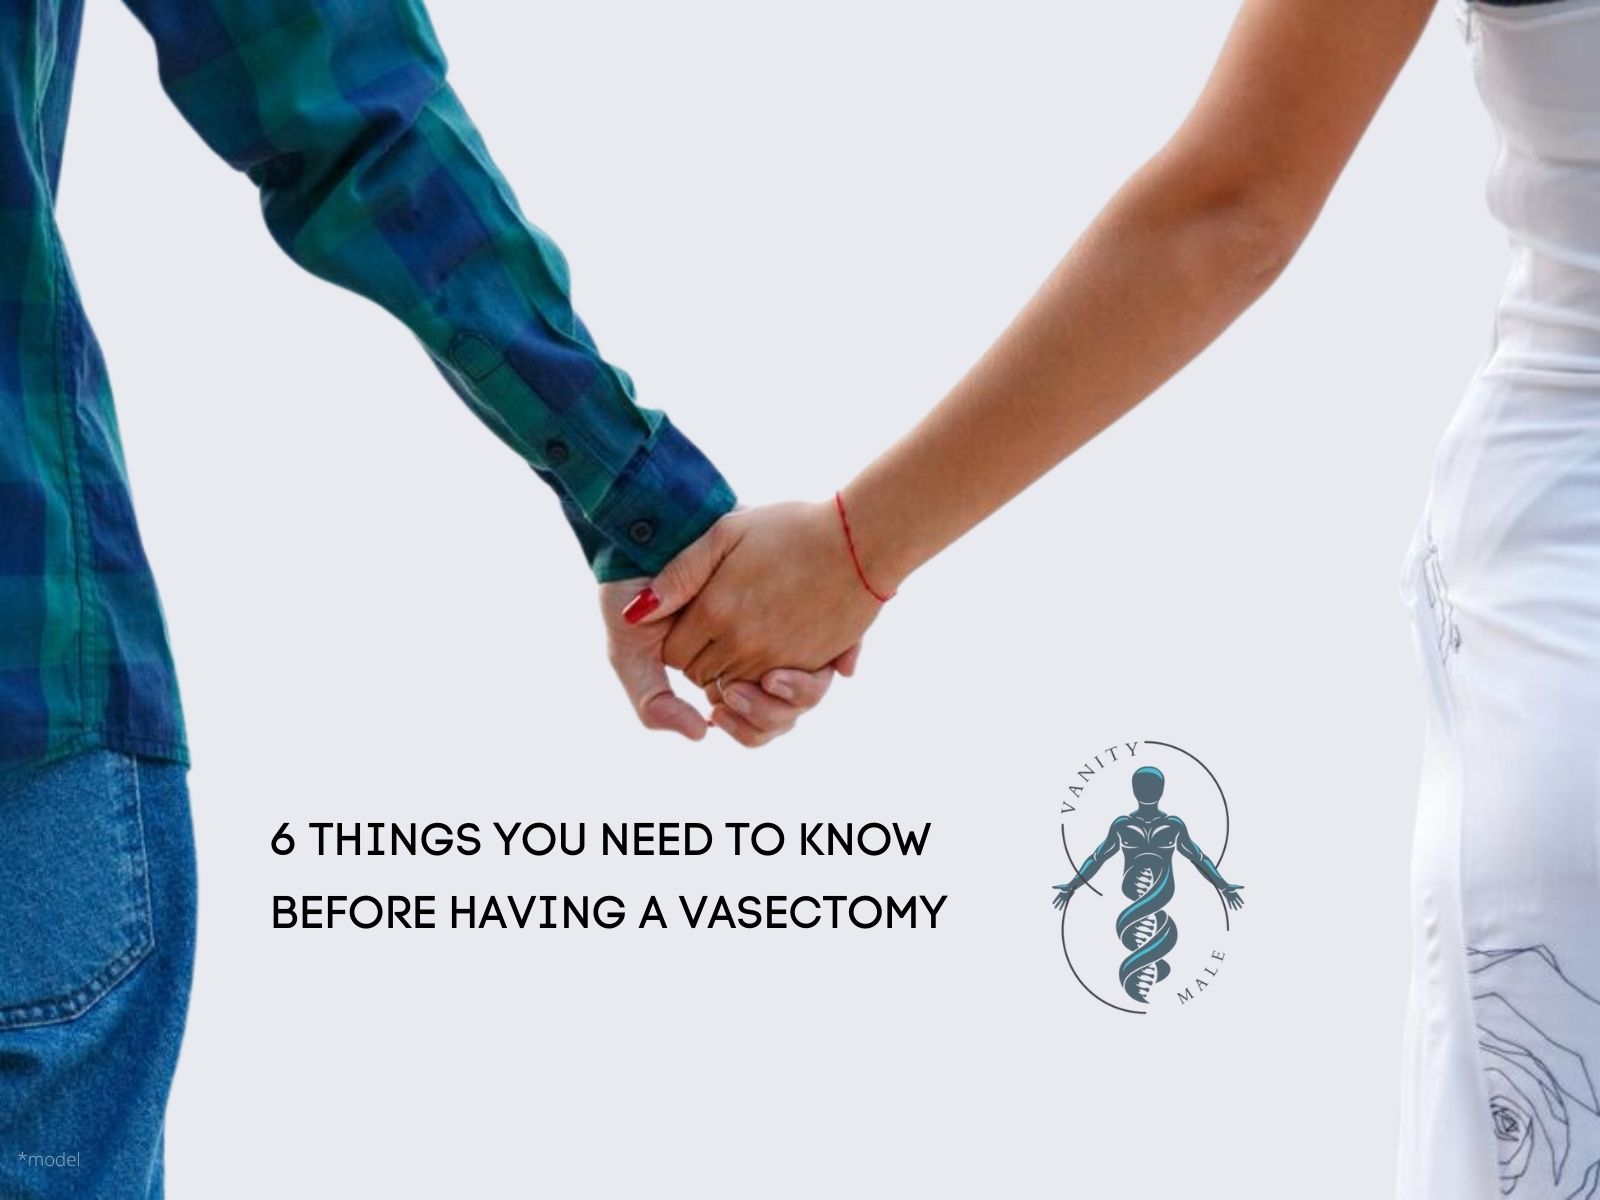 6 Things You Need to Know Before Having a Vasectomy